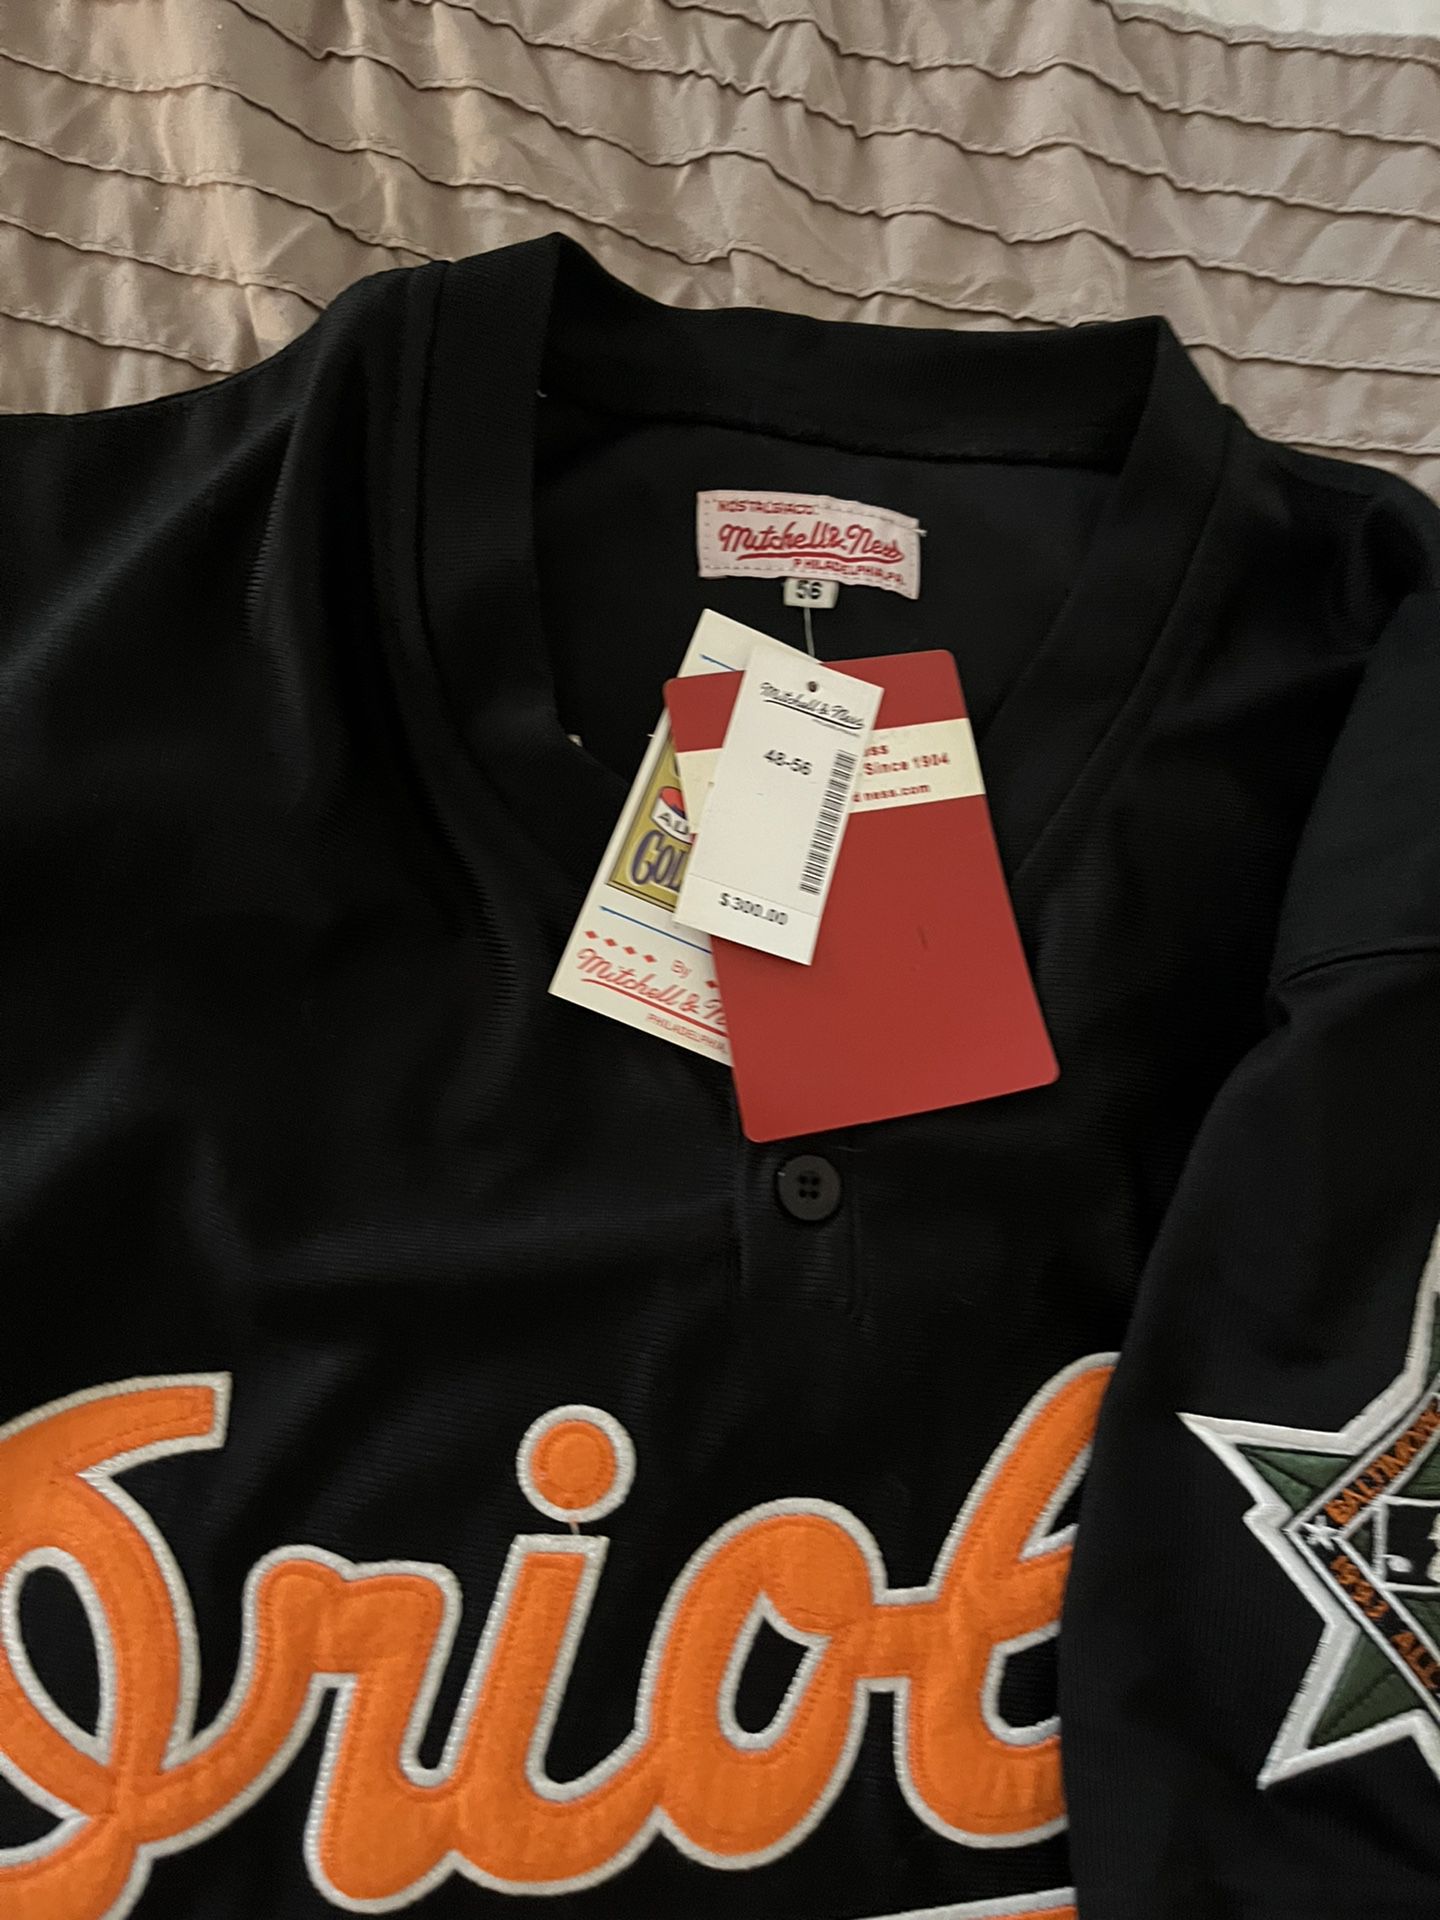 Orioles jersey for Sale in York, PA - OfferUp